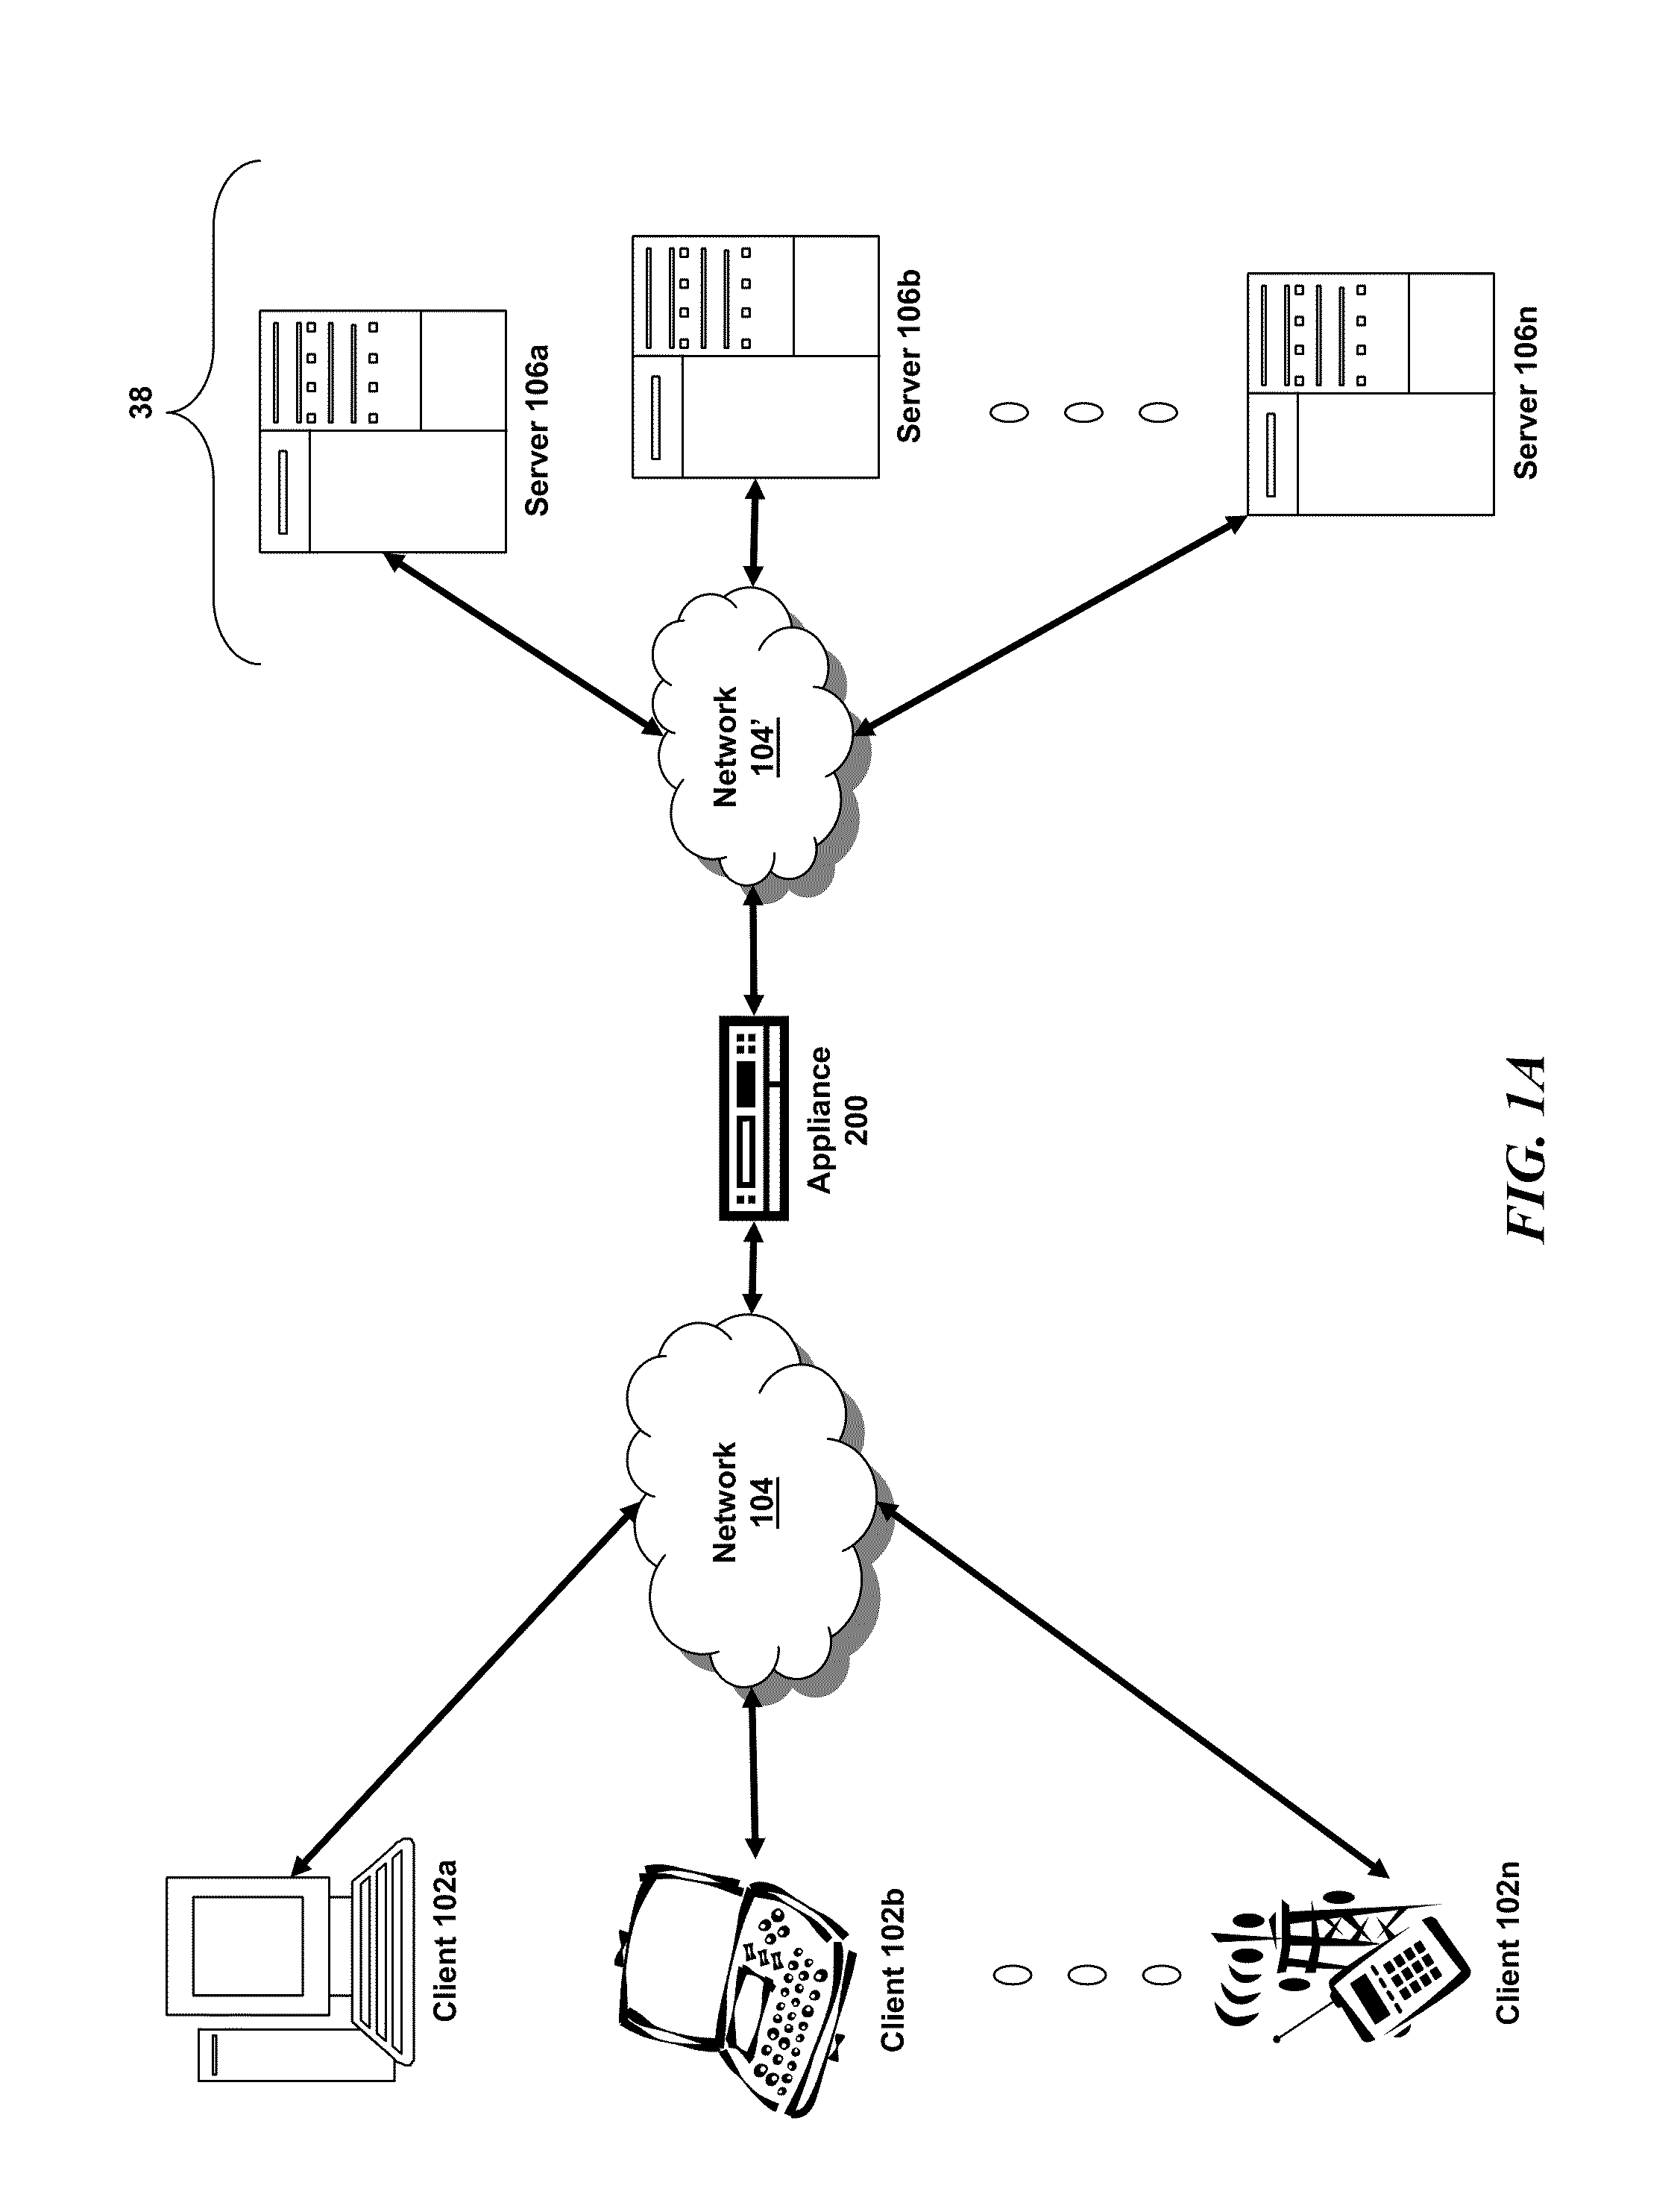 Systems and methods for connection management for asynchronous messaging over HTTP